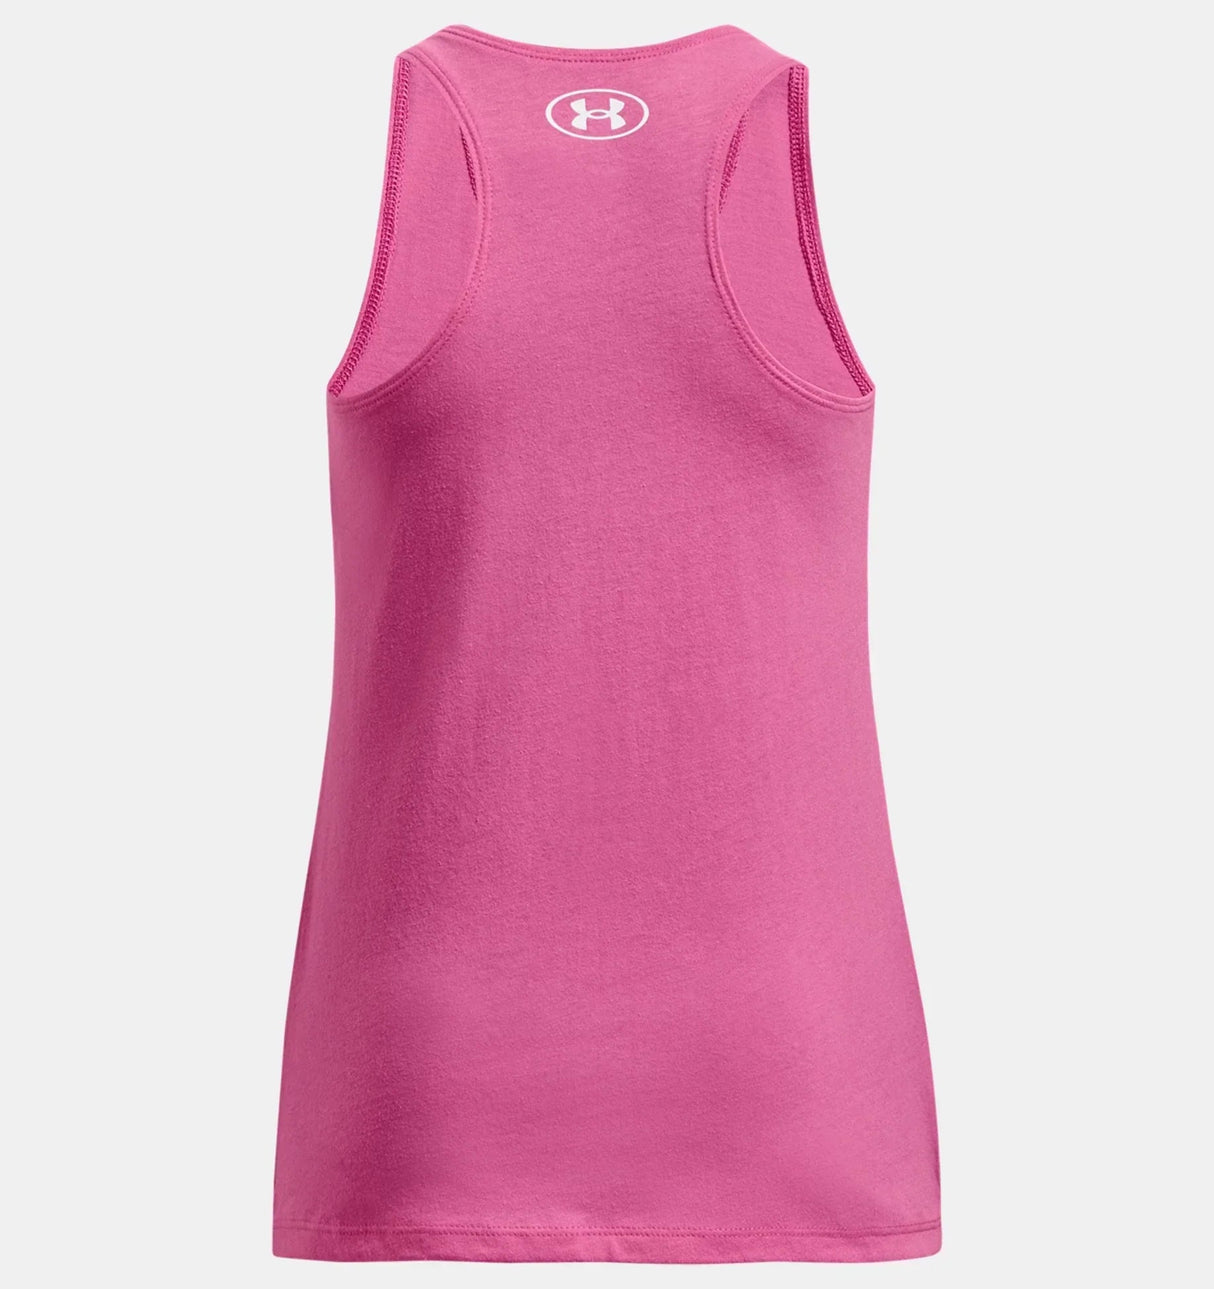 Under Armour Youth Girls Bubble Tank - A&M Clothing & Shoes